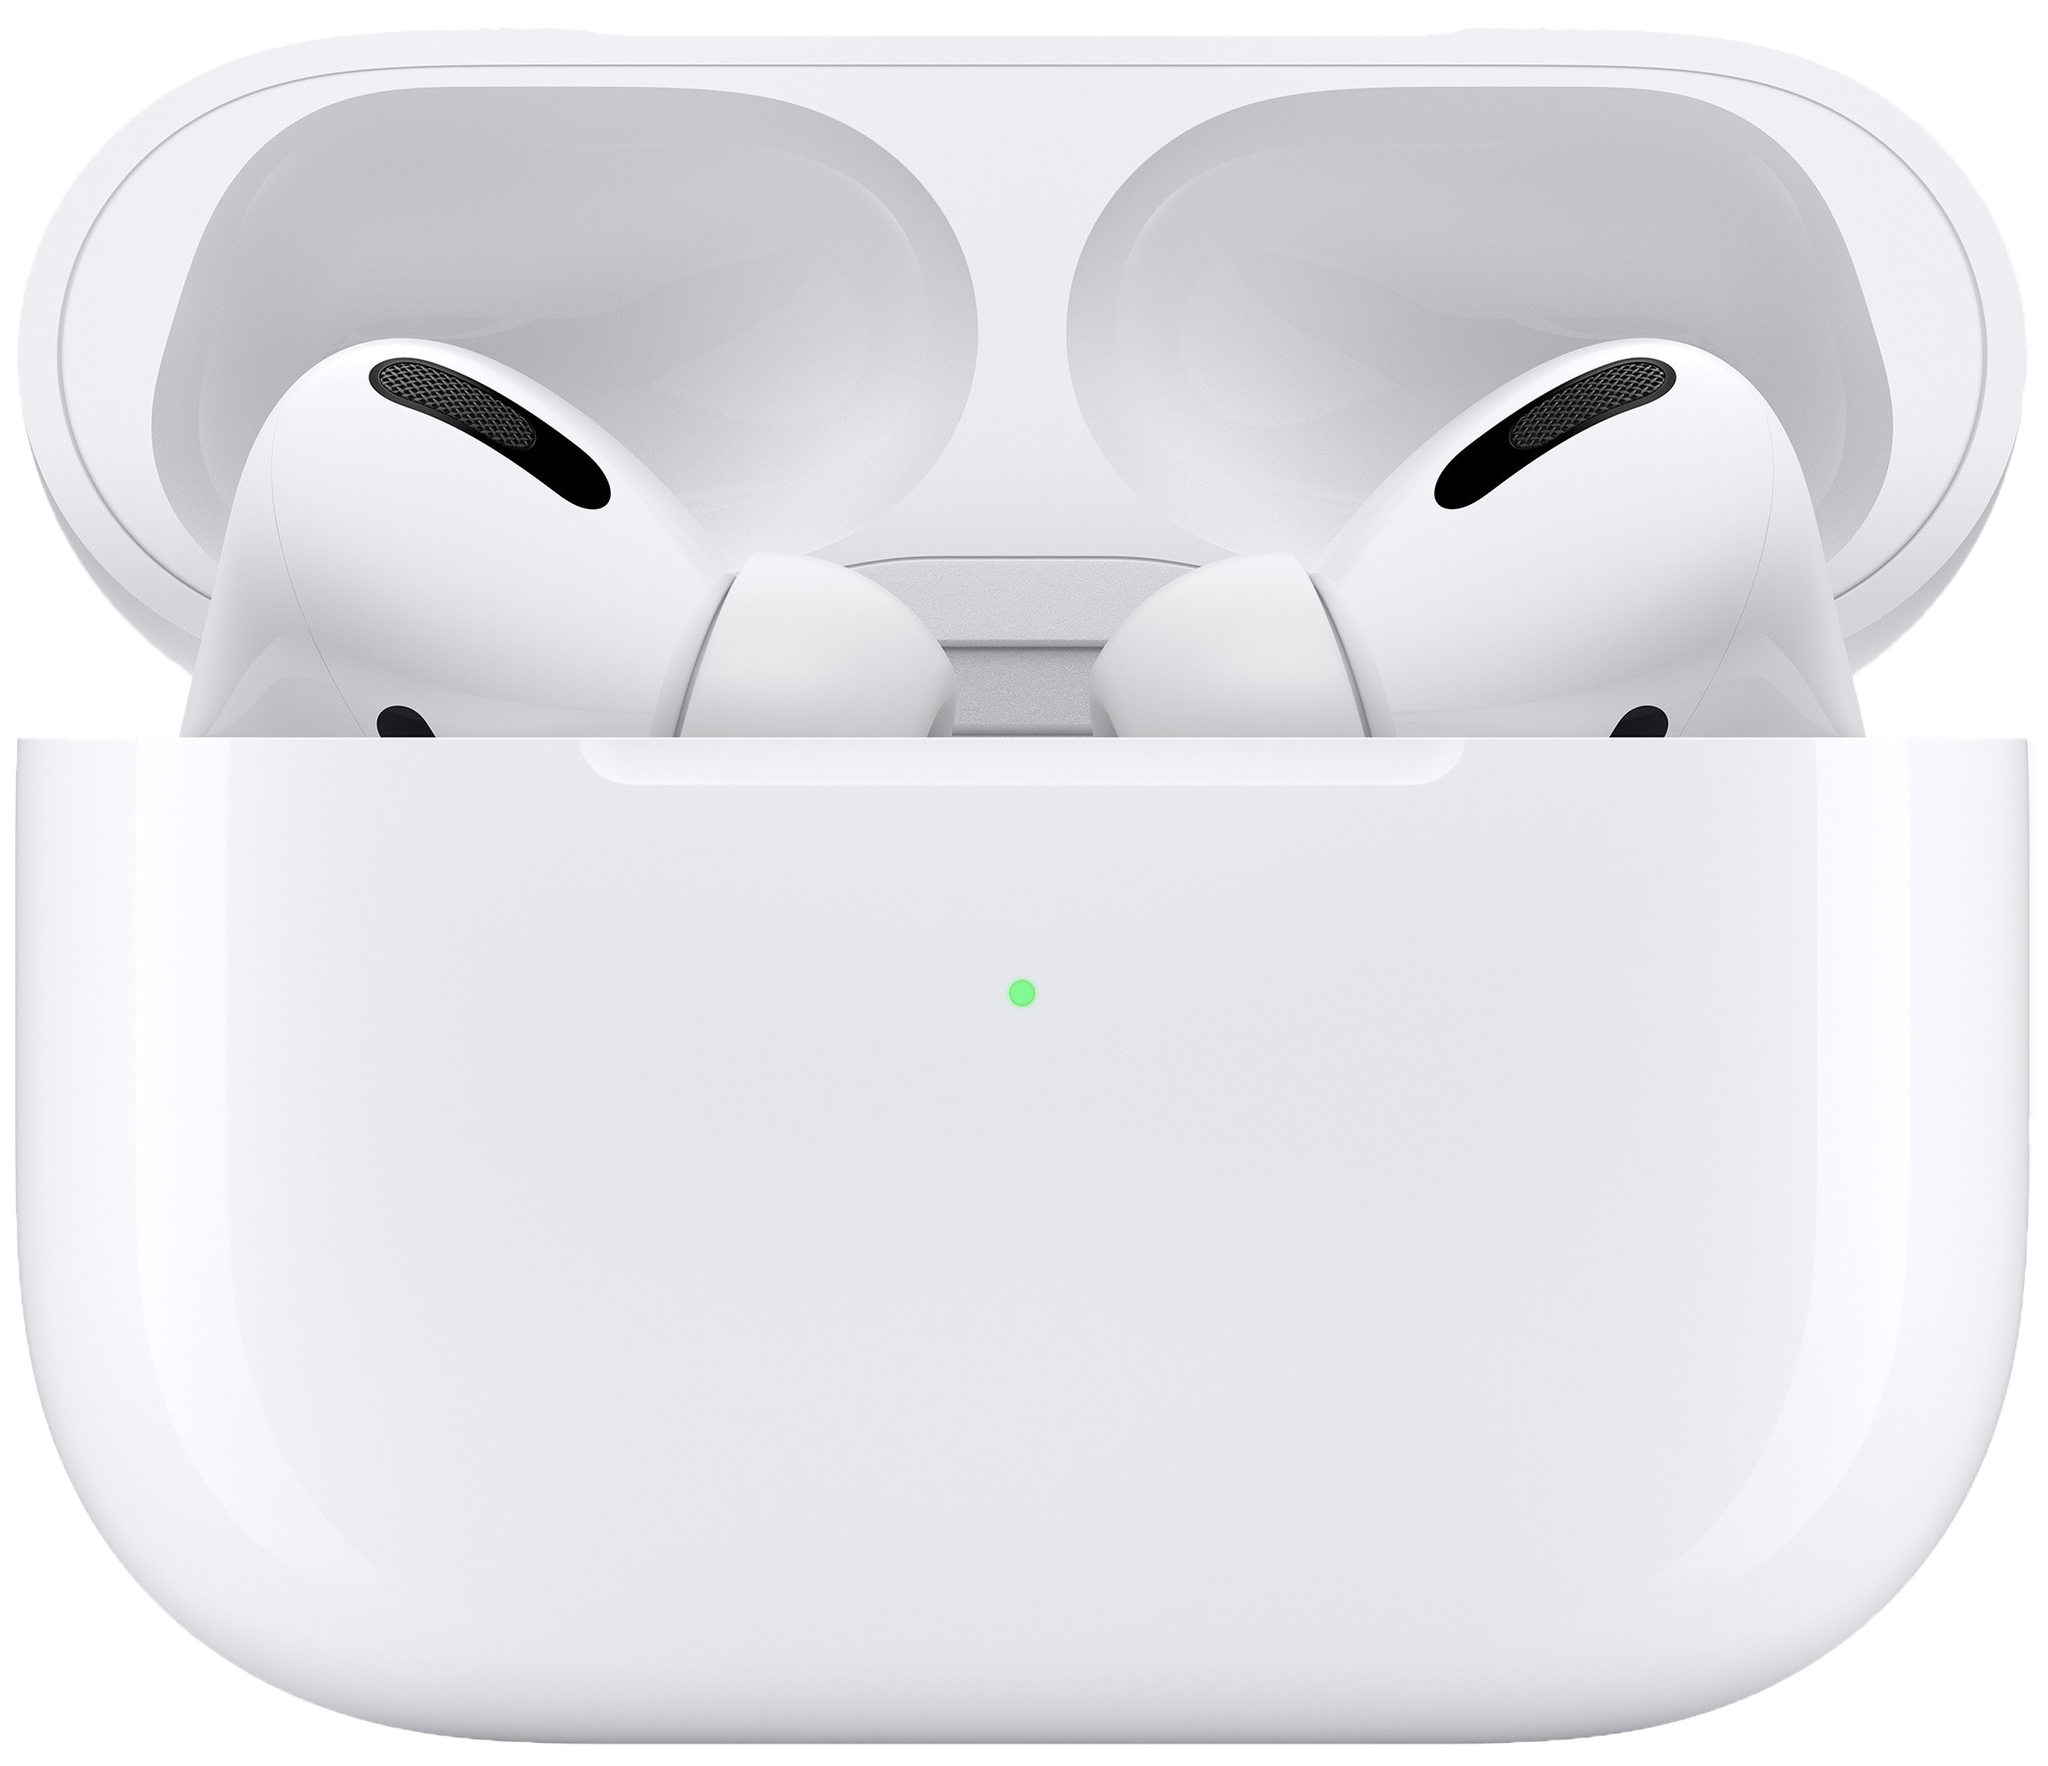 AirPods Pro render